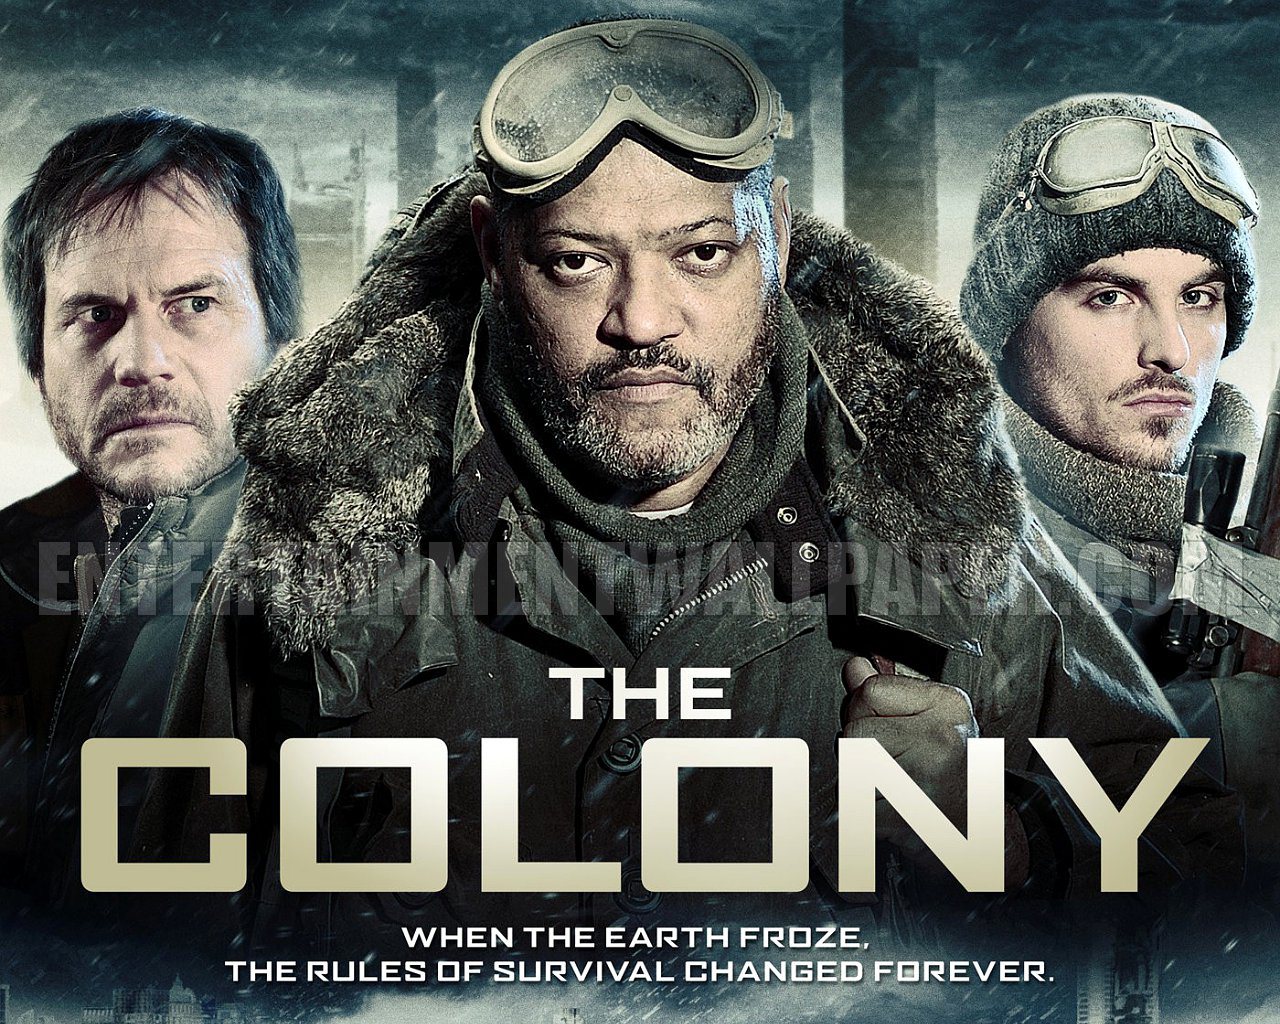 REVIEW: ‘The Colony’, SKIP IT!!!